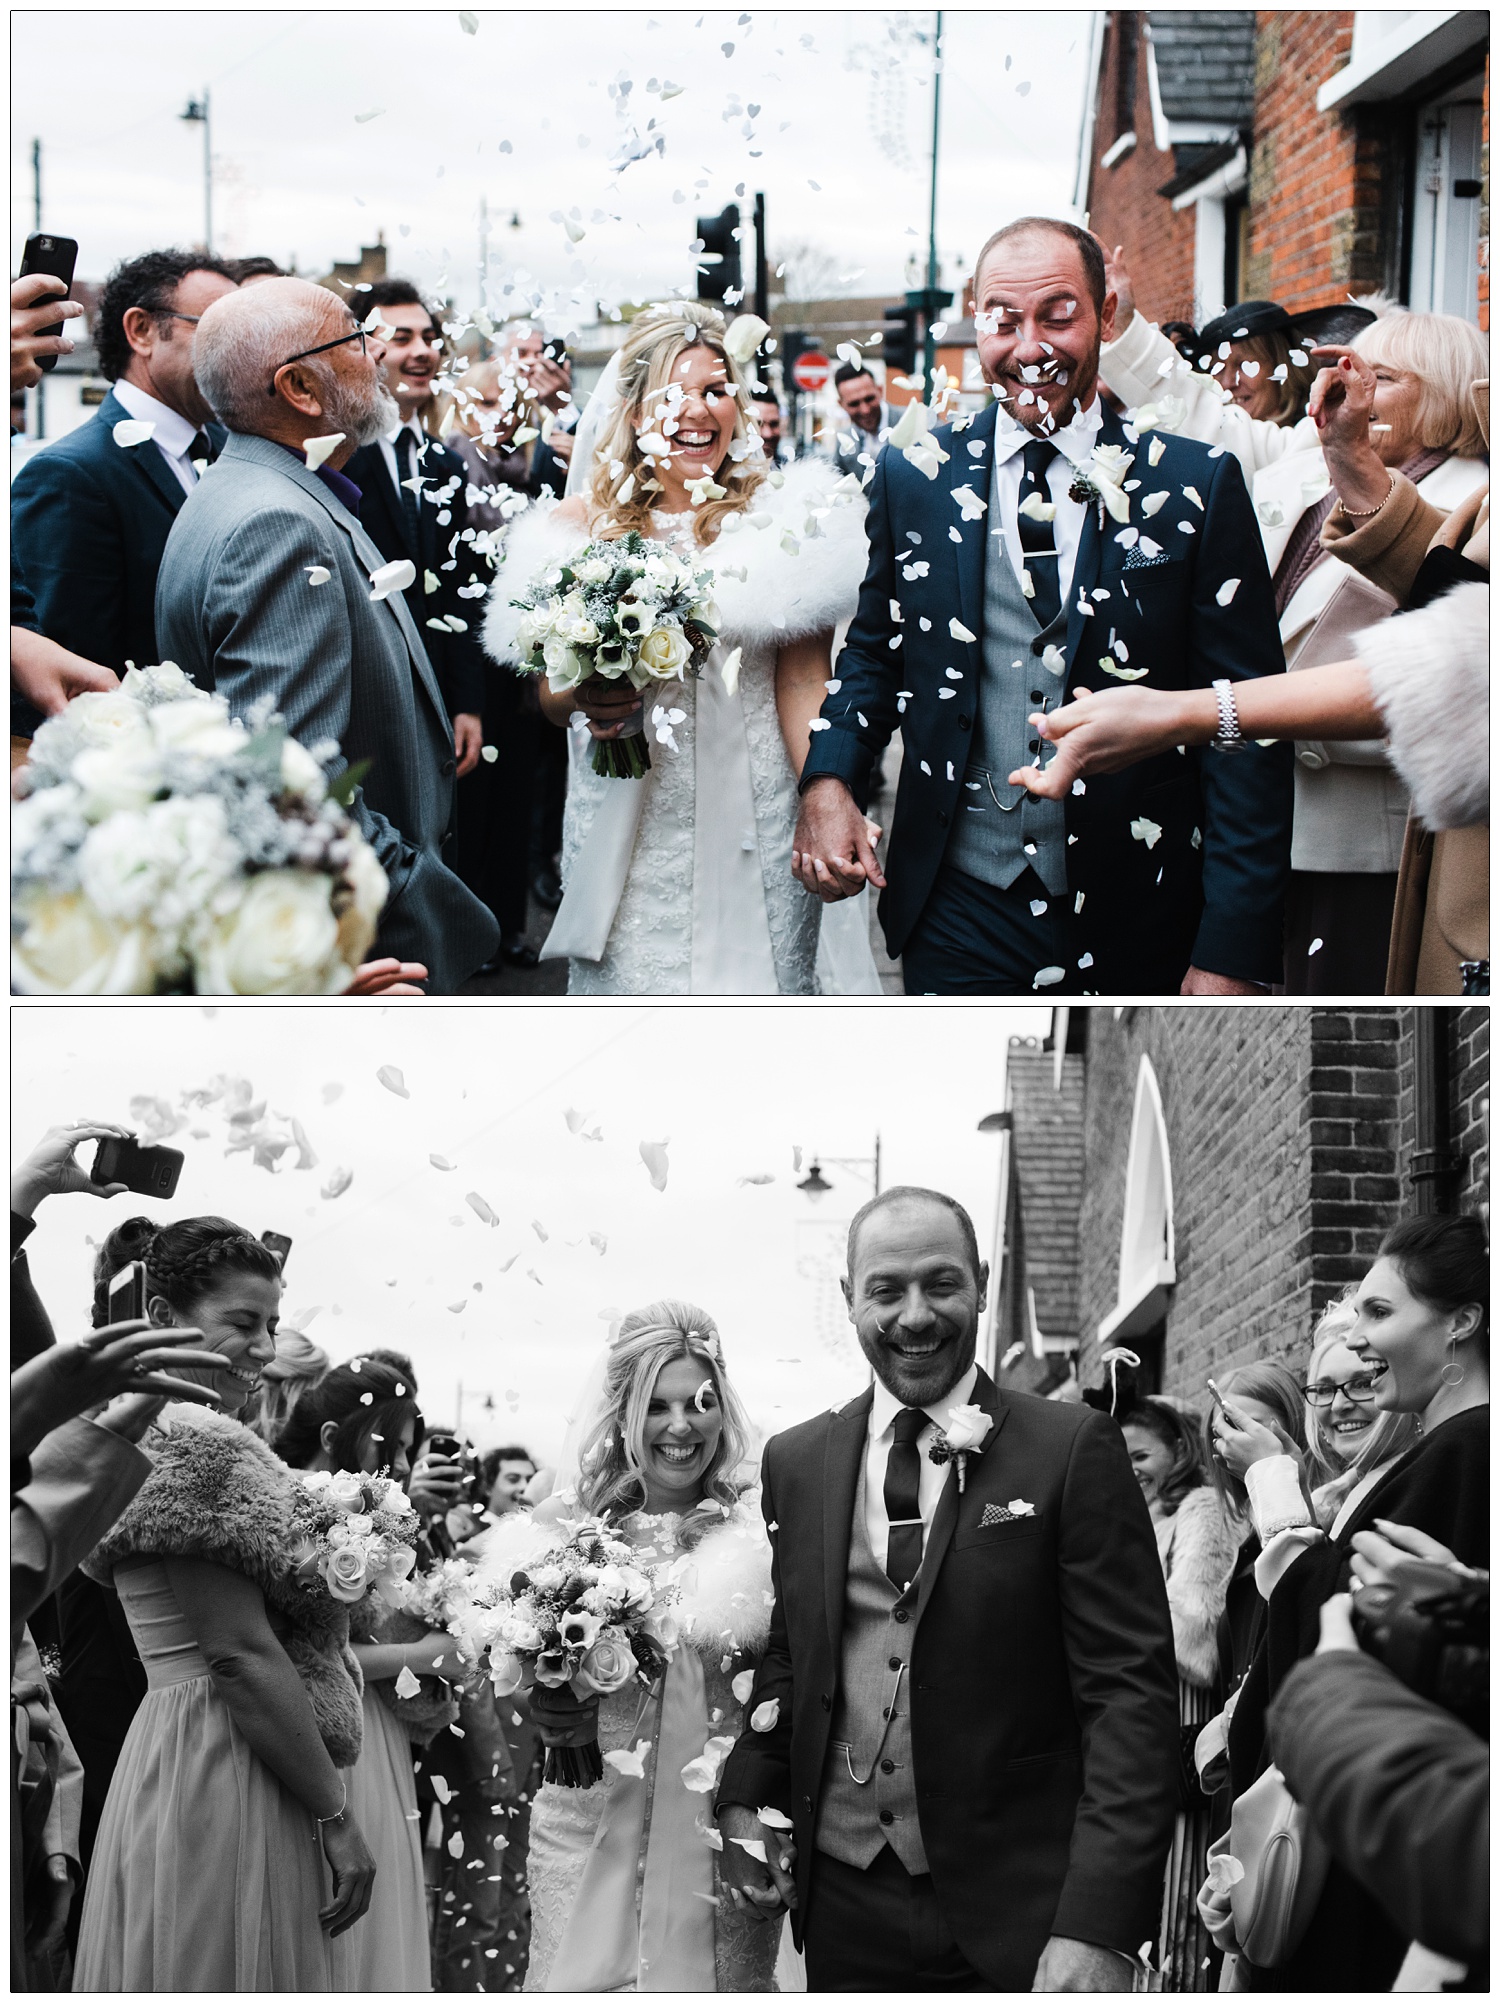 People throwing confetti and bride and groom outside the Old Parish Rooms on Hockley Road.